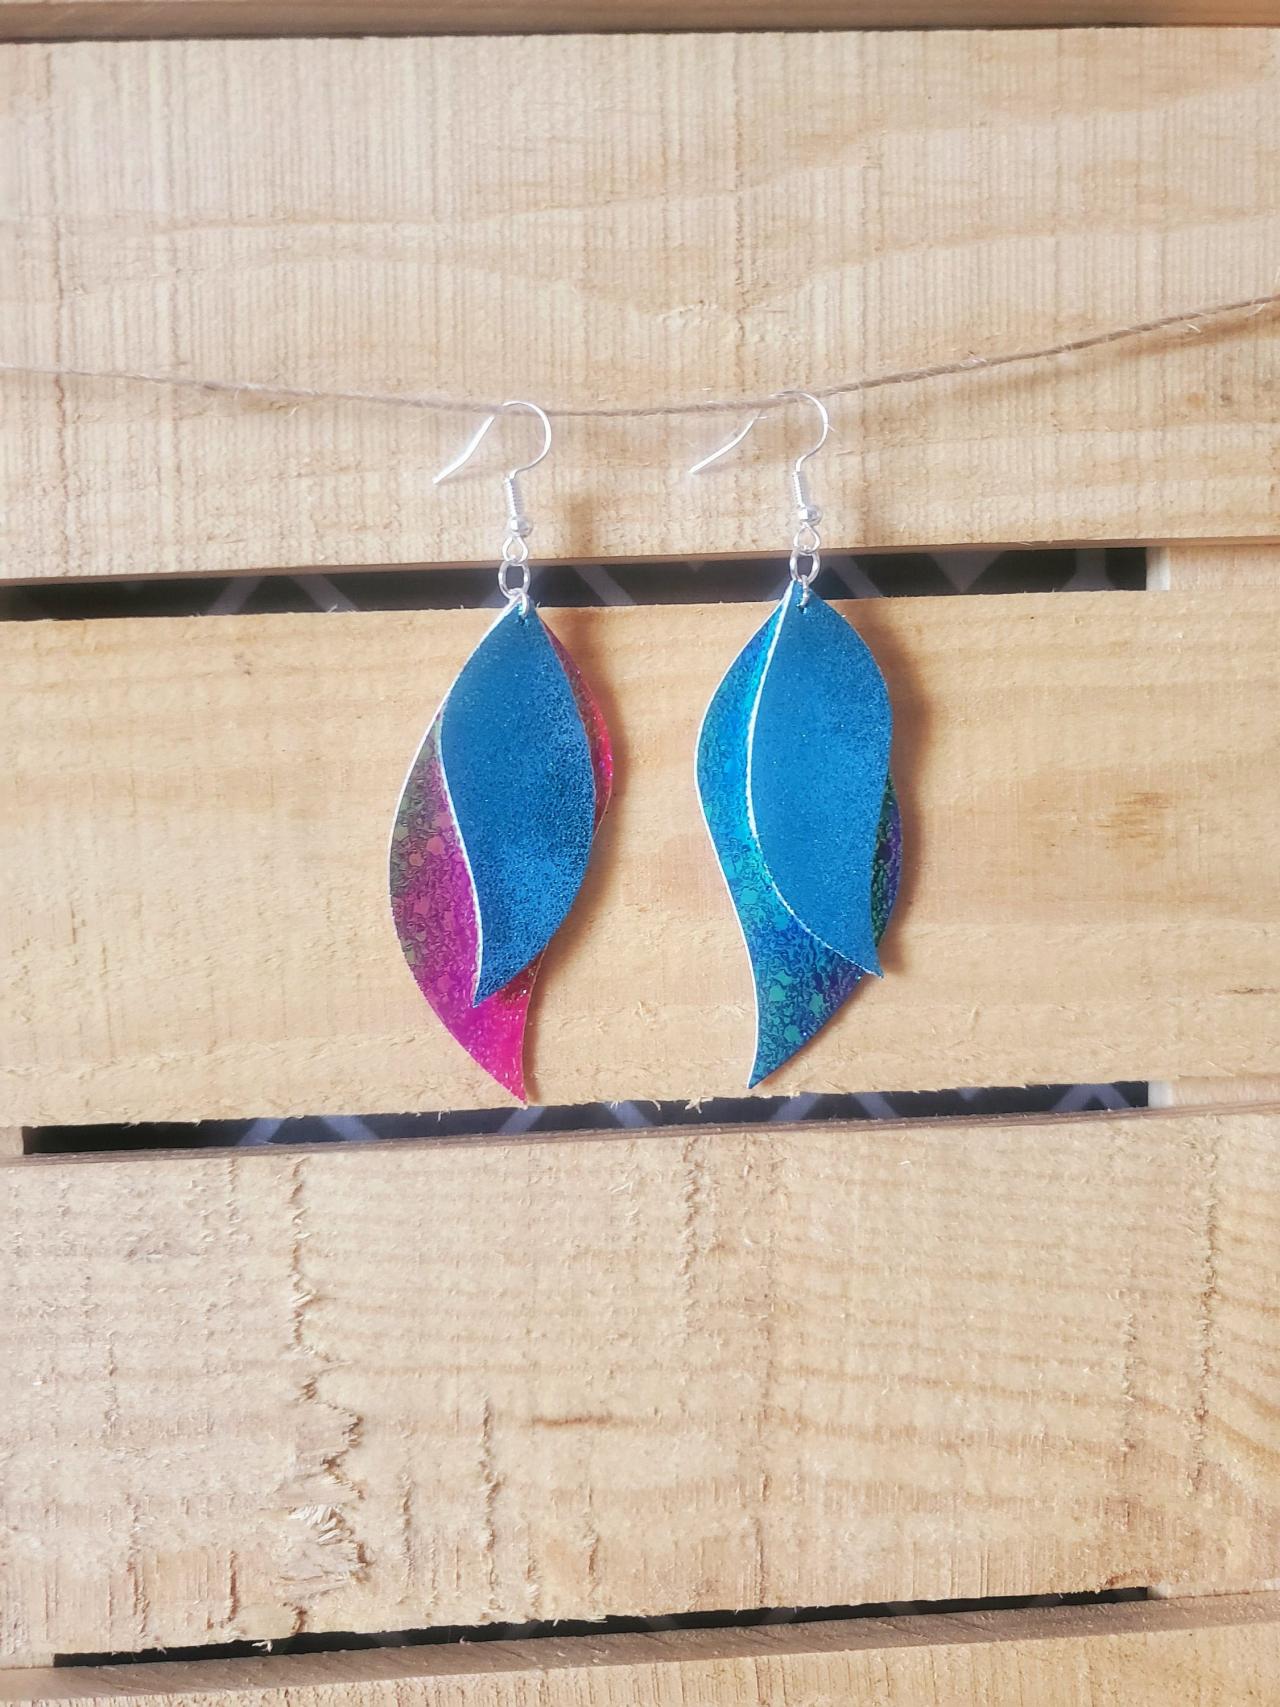 Handmade Teal Leather Earrings, Leaf Turquoise Jewelry, Layered Bright Jewelry, Statement Earrings, Dangle Leather Earring, Metallic Jewelry